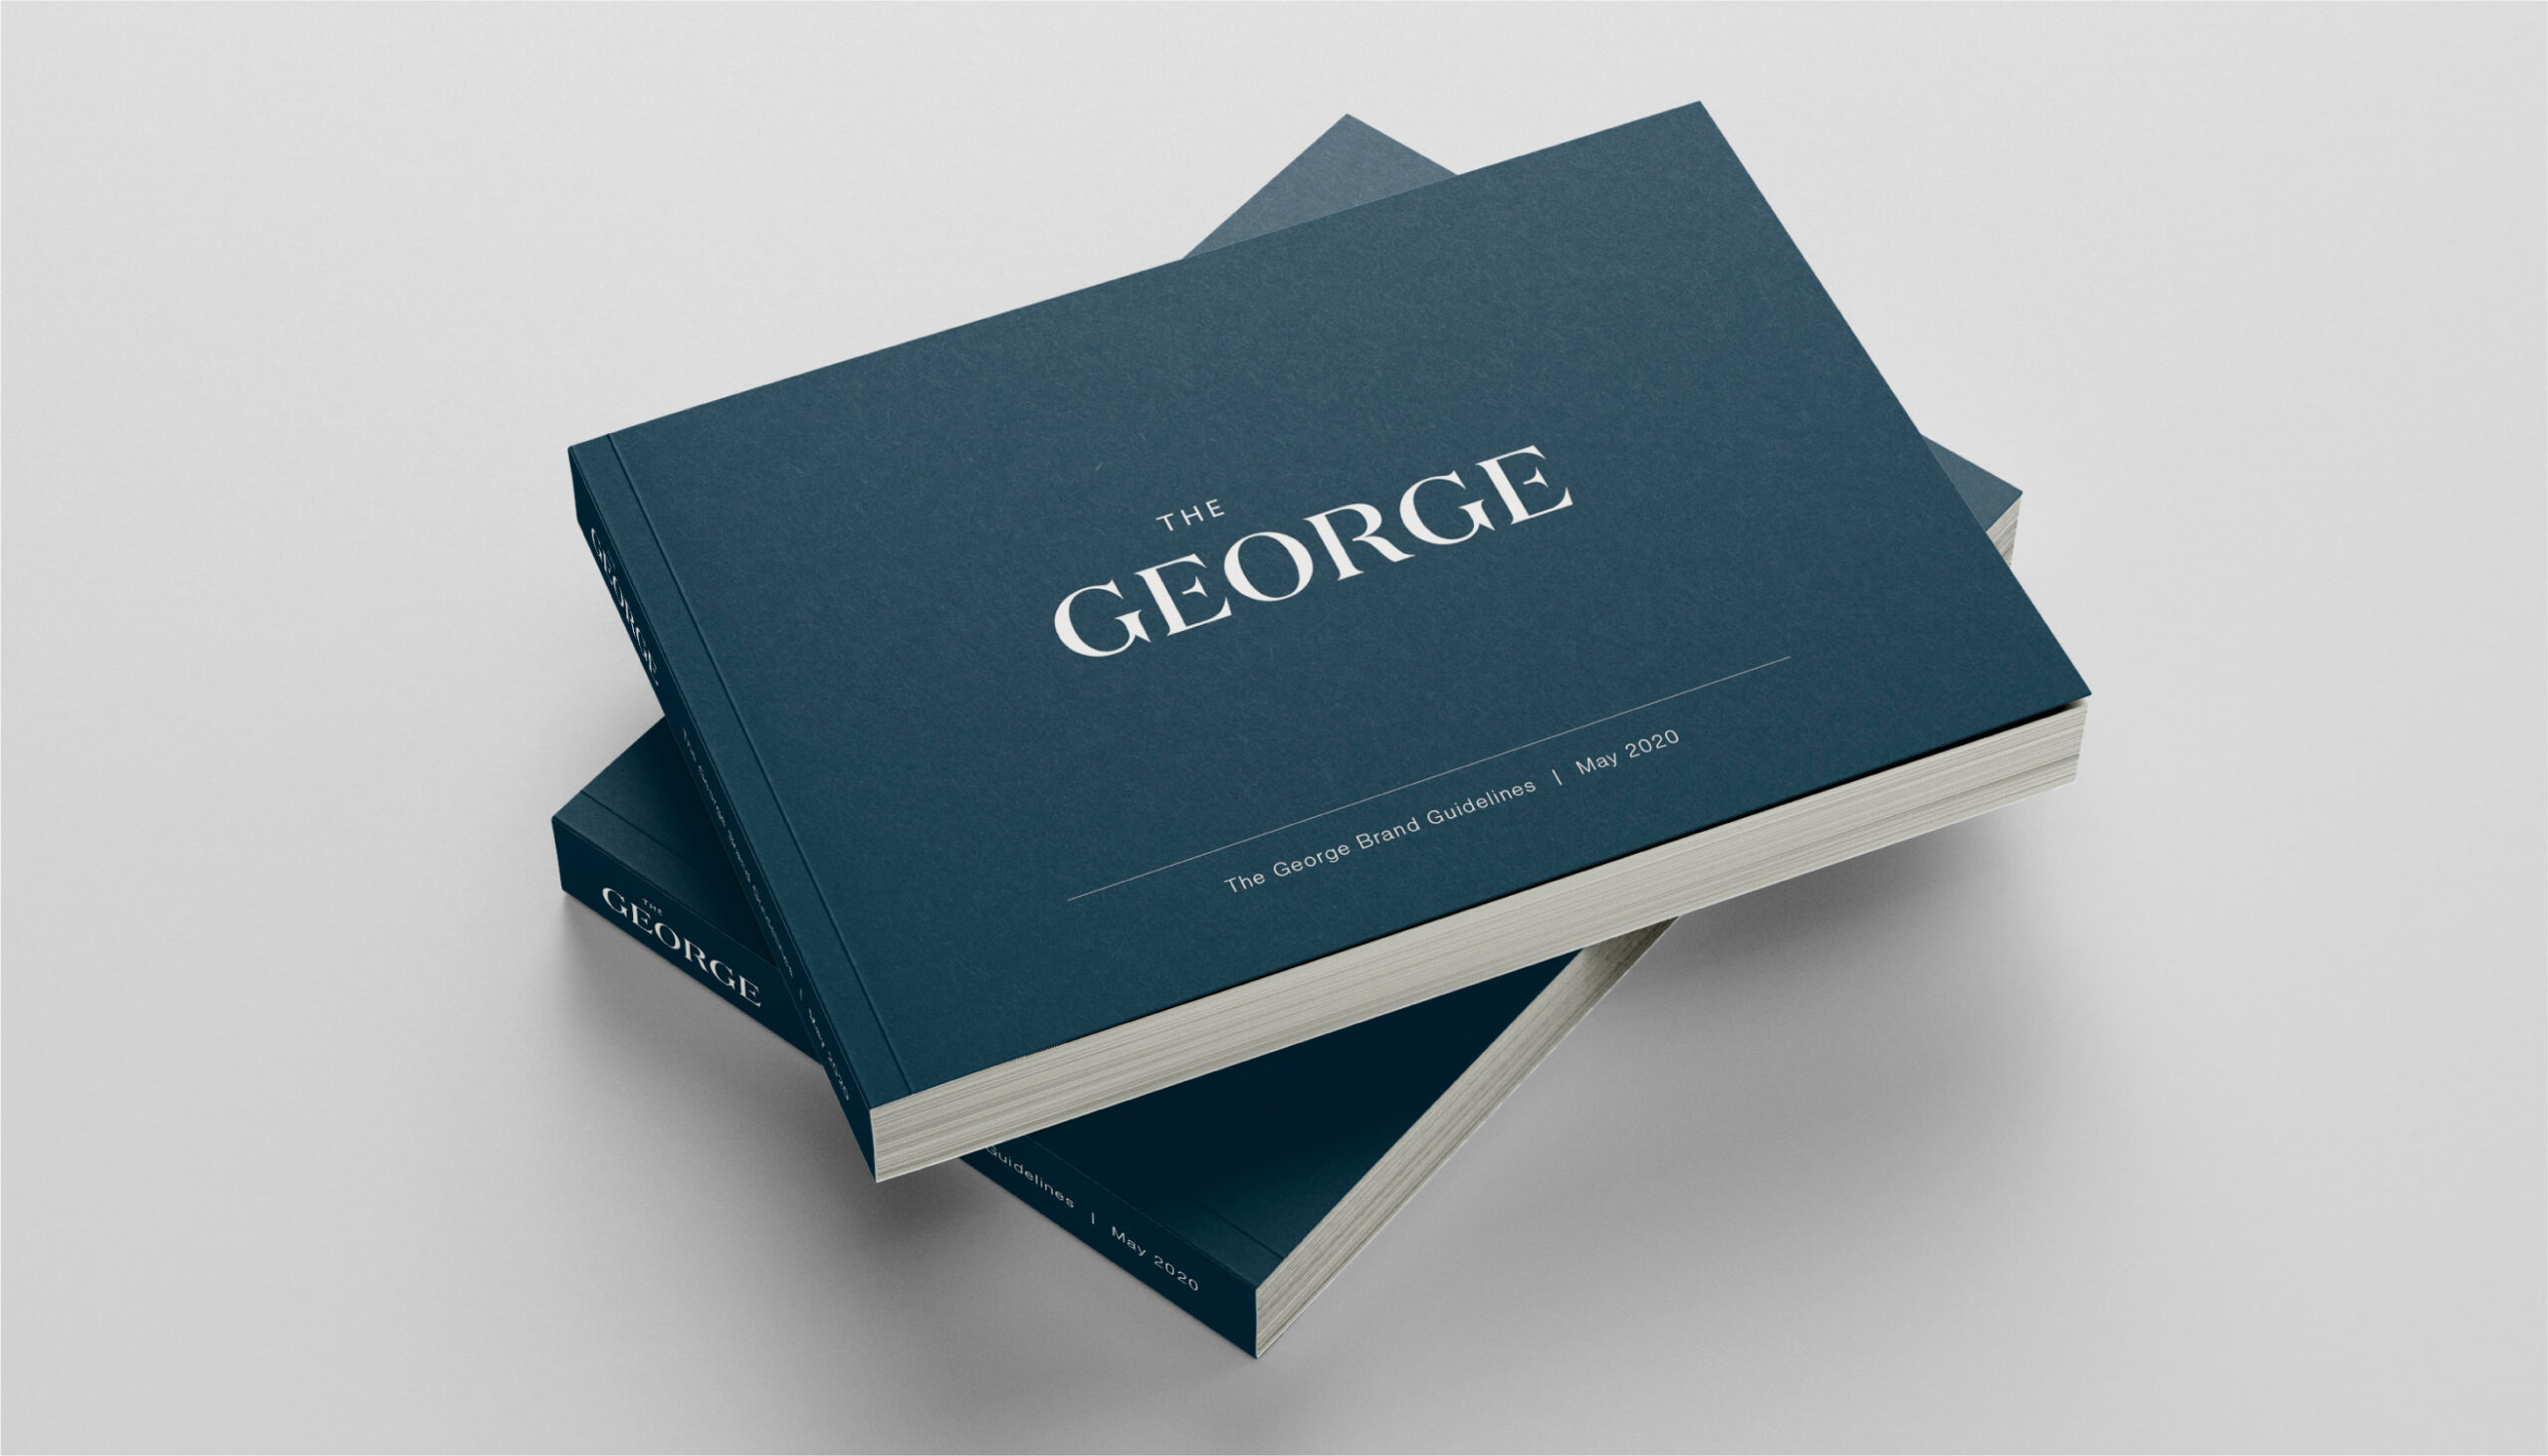 George_casestudybookfront-11_small